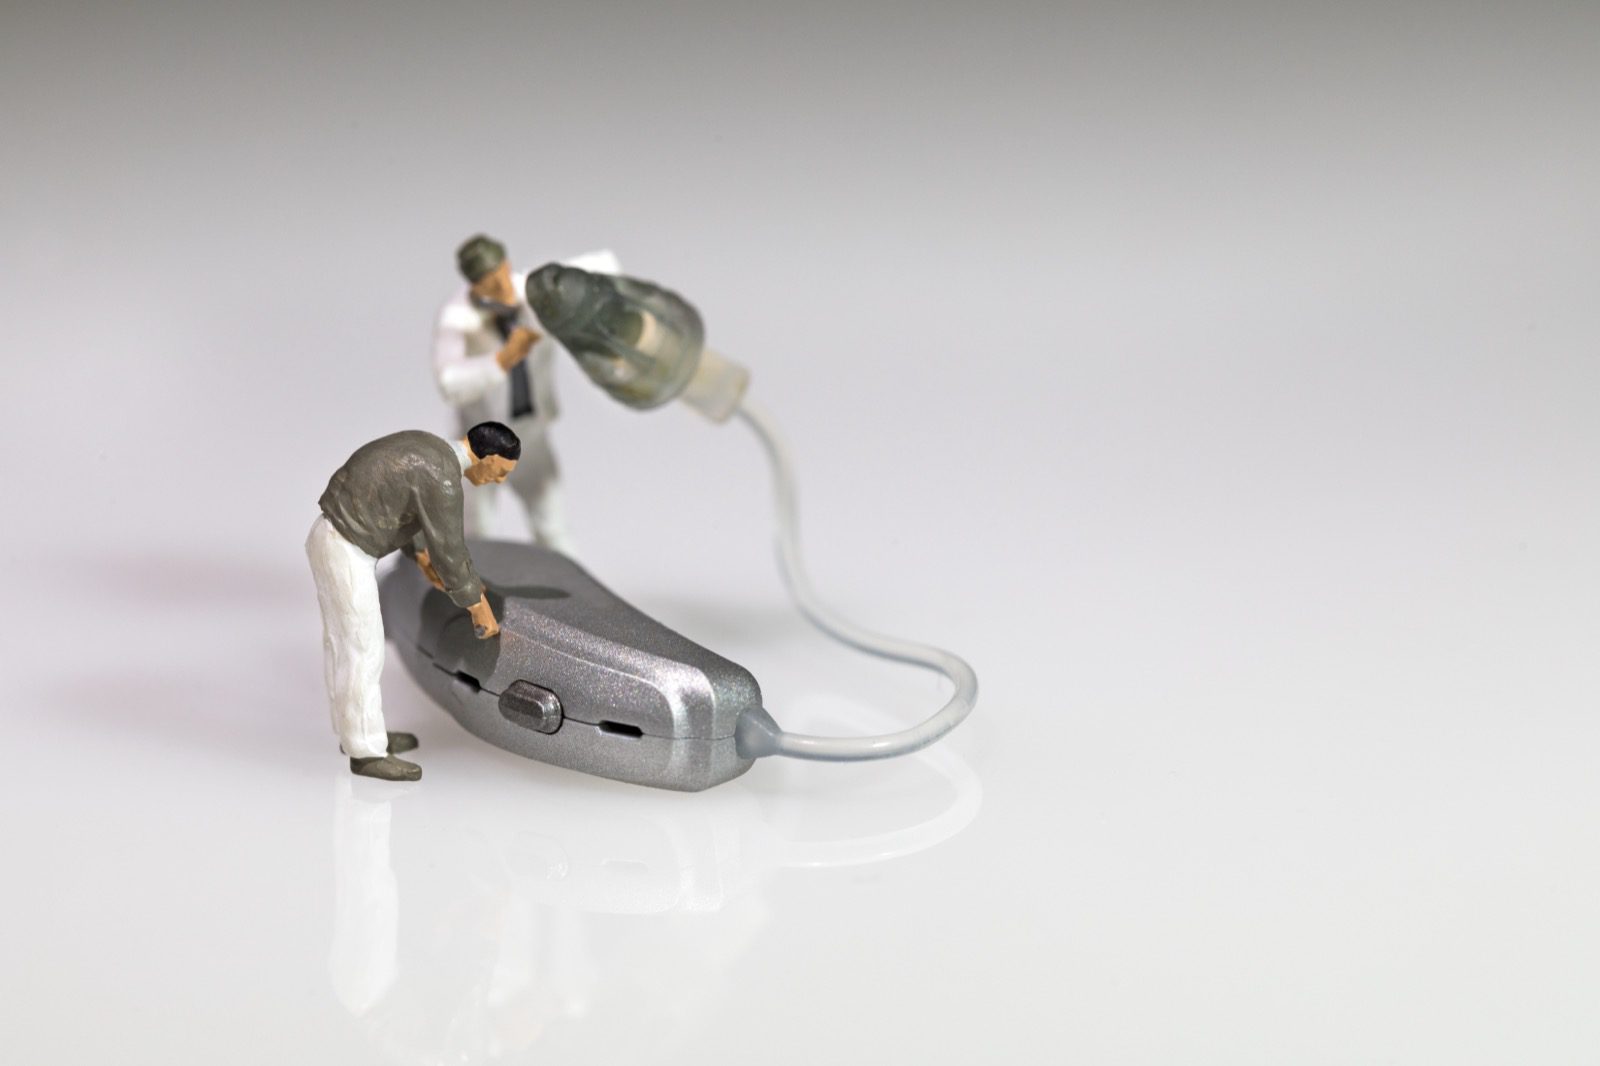 Miniature figures working on a hearing aid